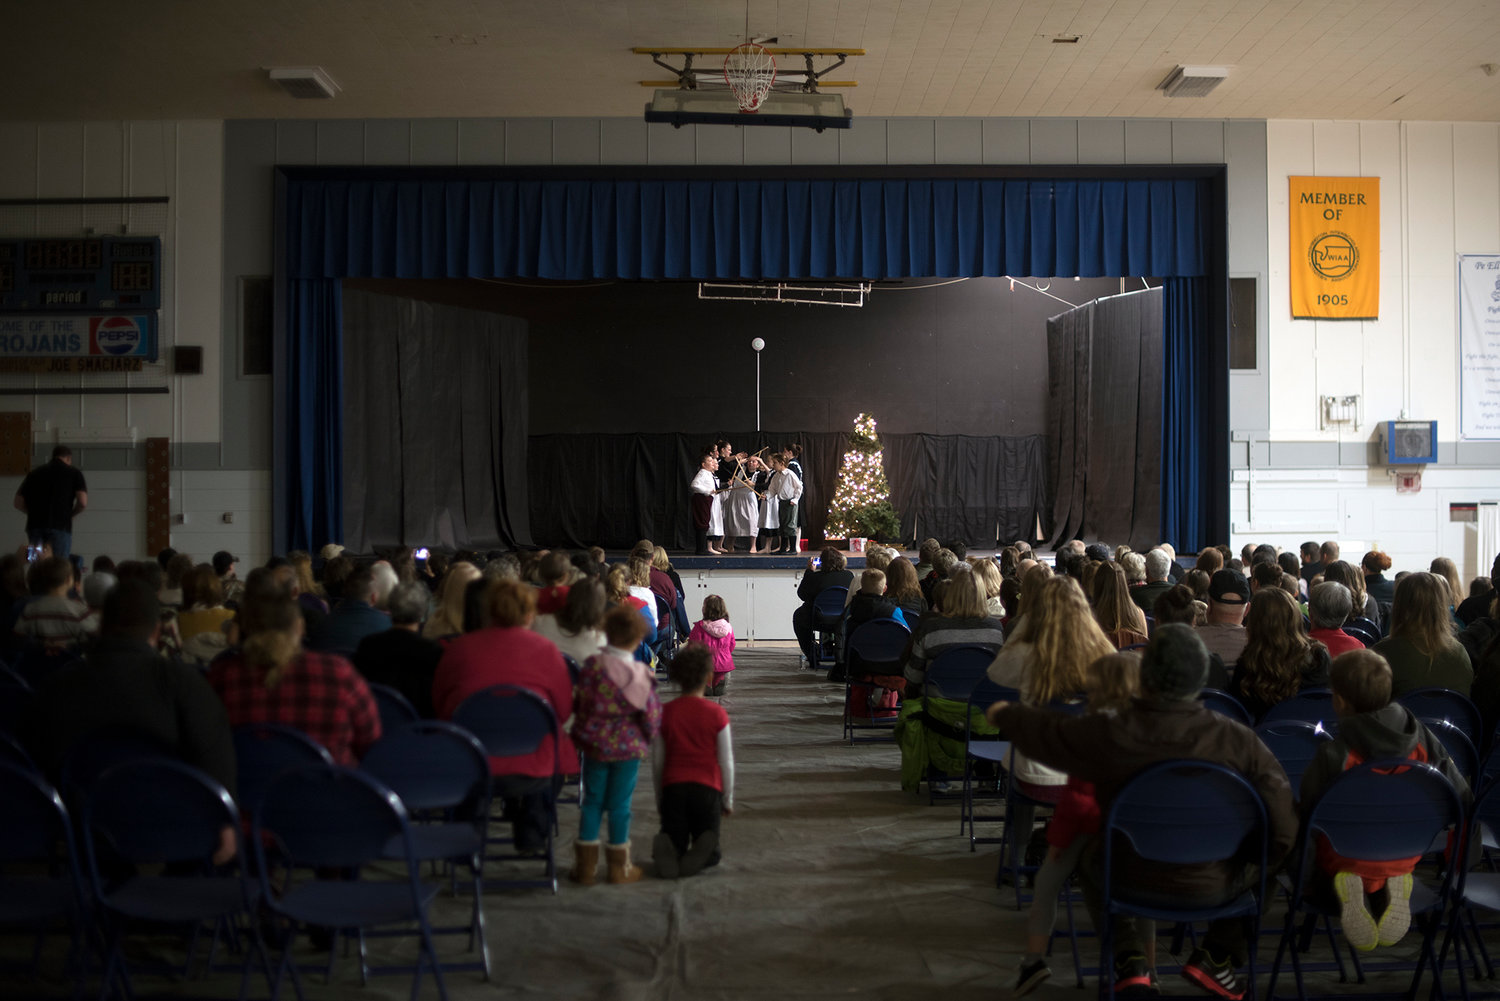 People packed the Pe Ell High School gymnasium for the first of two performances of the Nutcracker on Saturday afternoon.